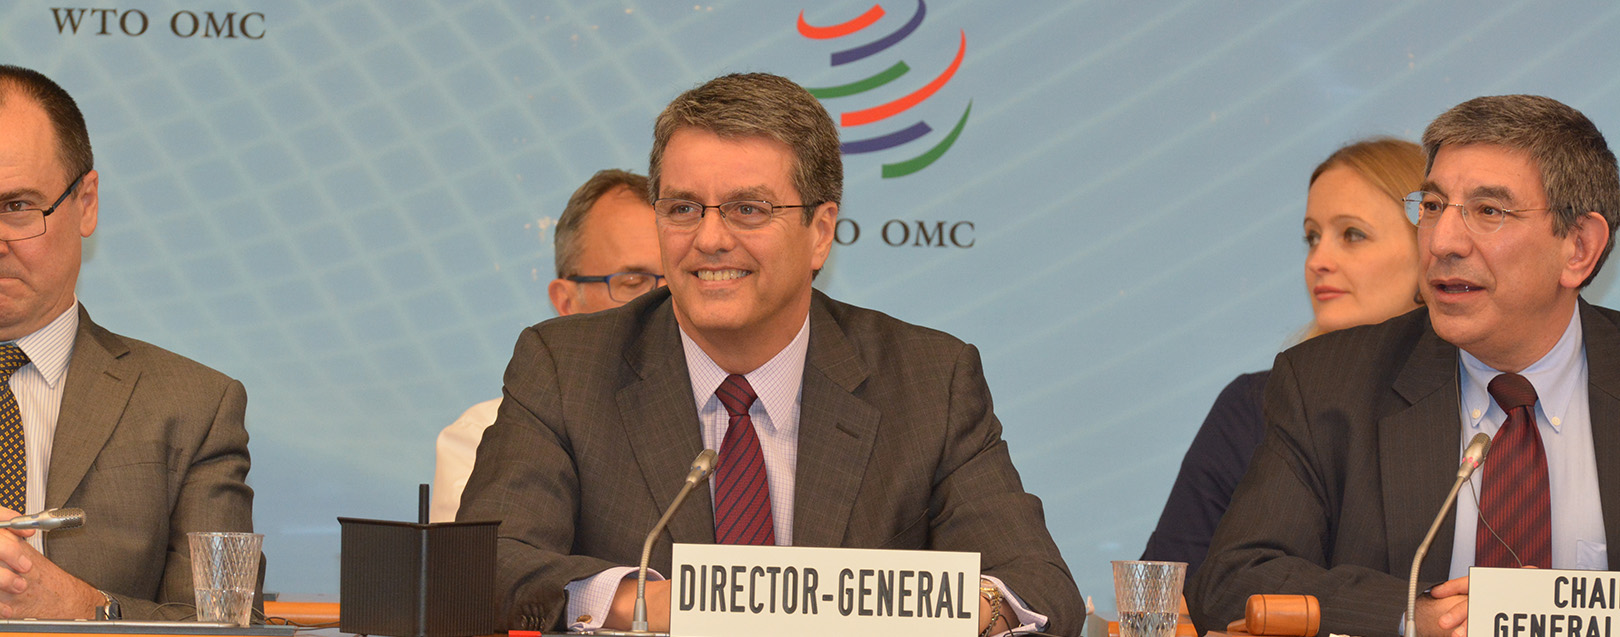 RTAs can’t replace multilateral trading system: WTO chief